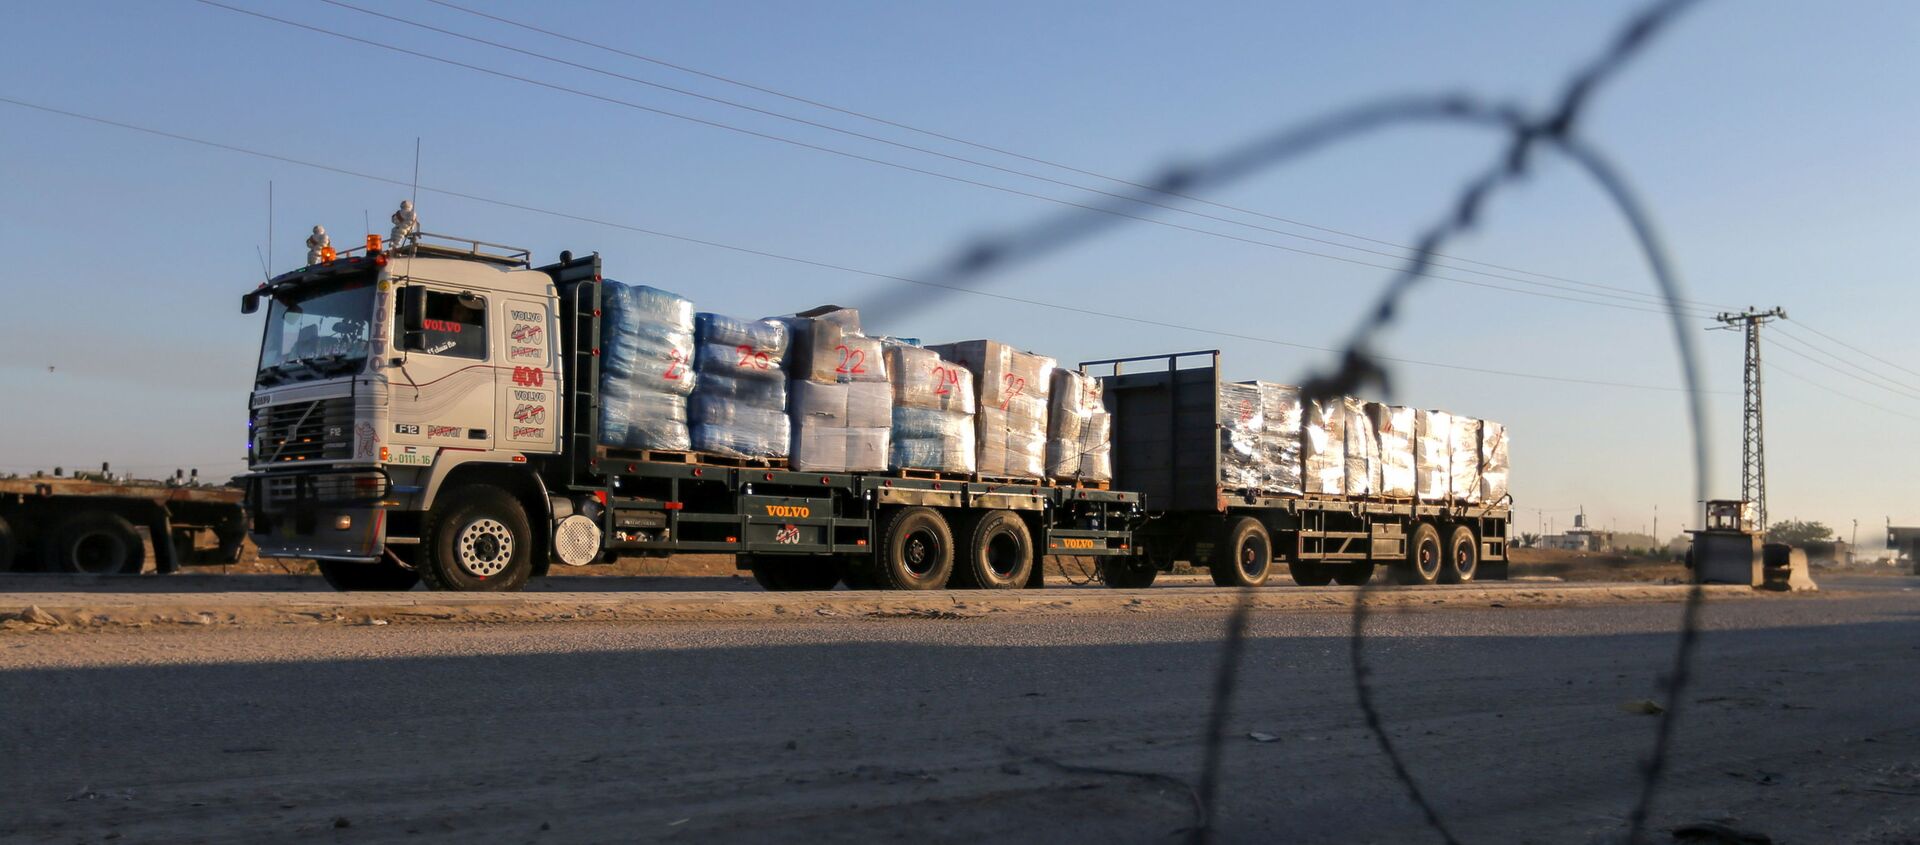 A truck carrying clothes for export is seen at Kerem Shalom crossing in Rafah in the southern Gaza Strip, June 21, 2021.  - Sputnik International, 1920, 24.06.2021